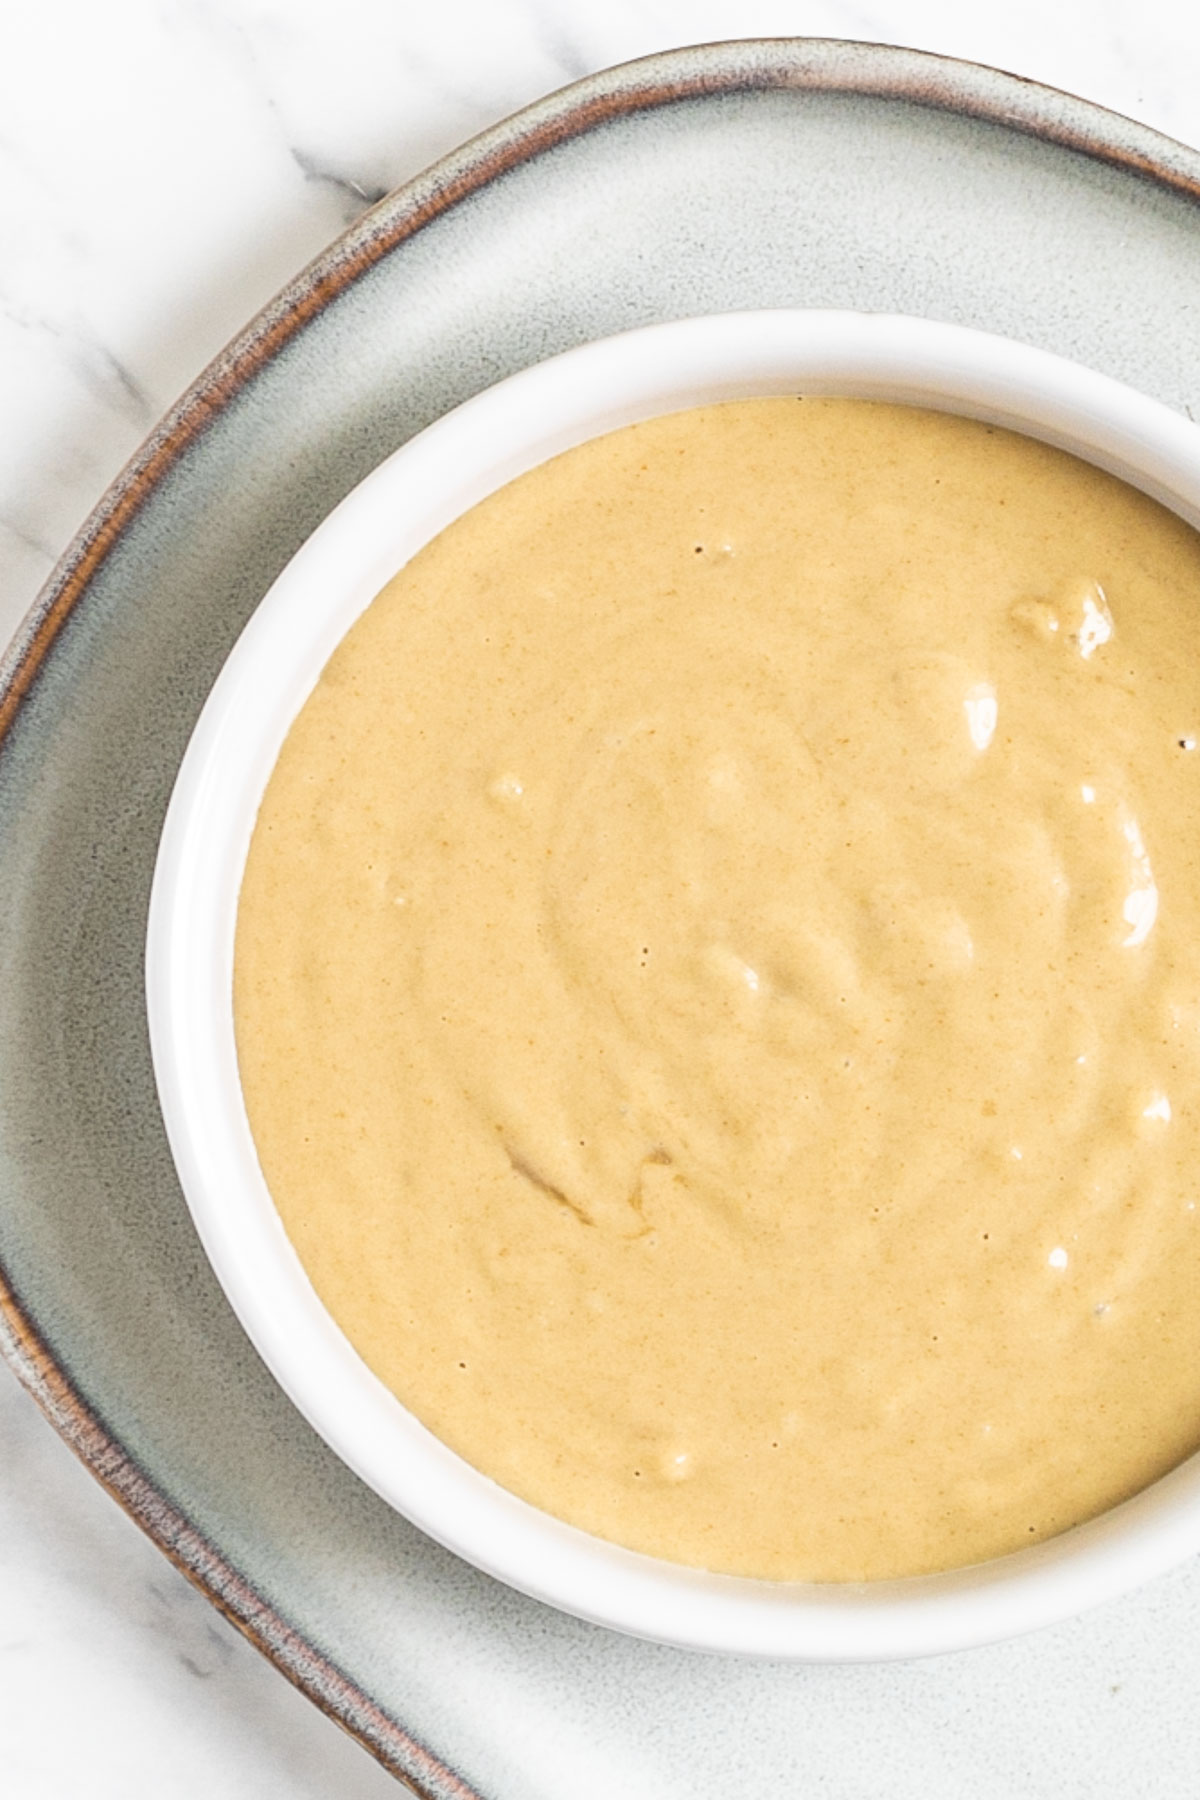 Creamy light brown sauce in a white shallow bowl.